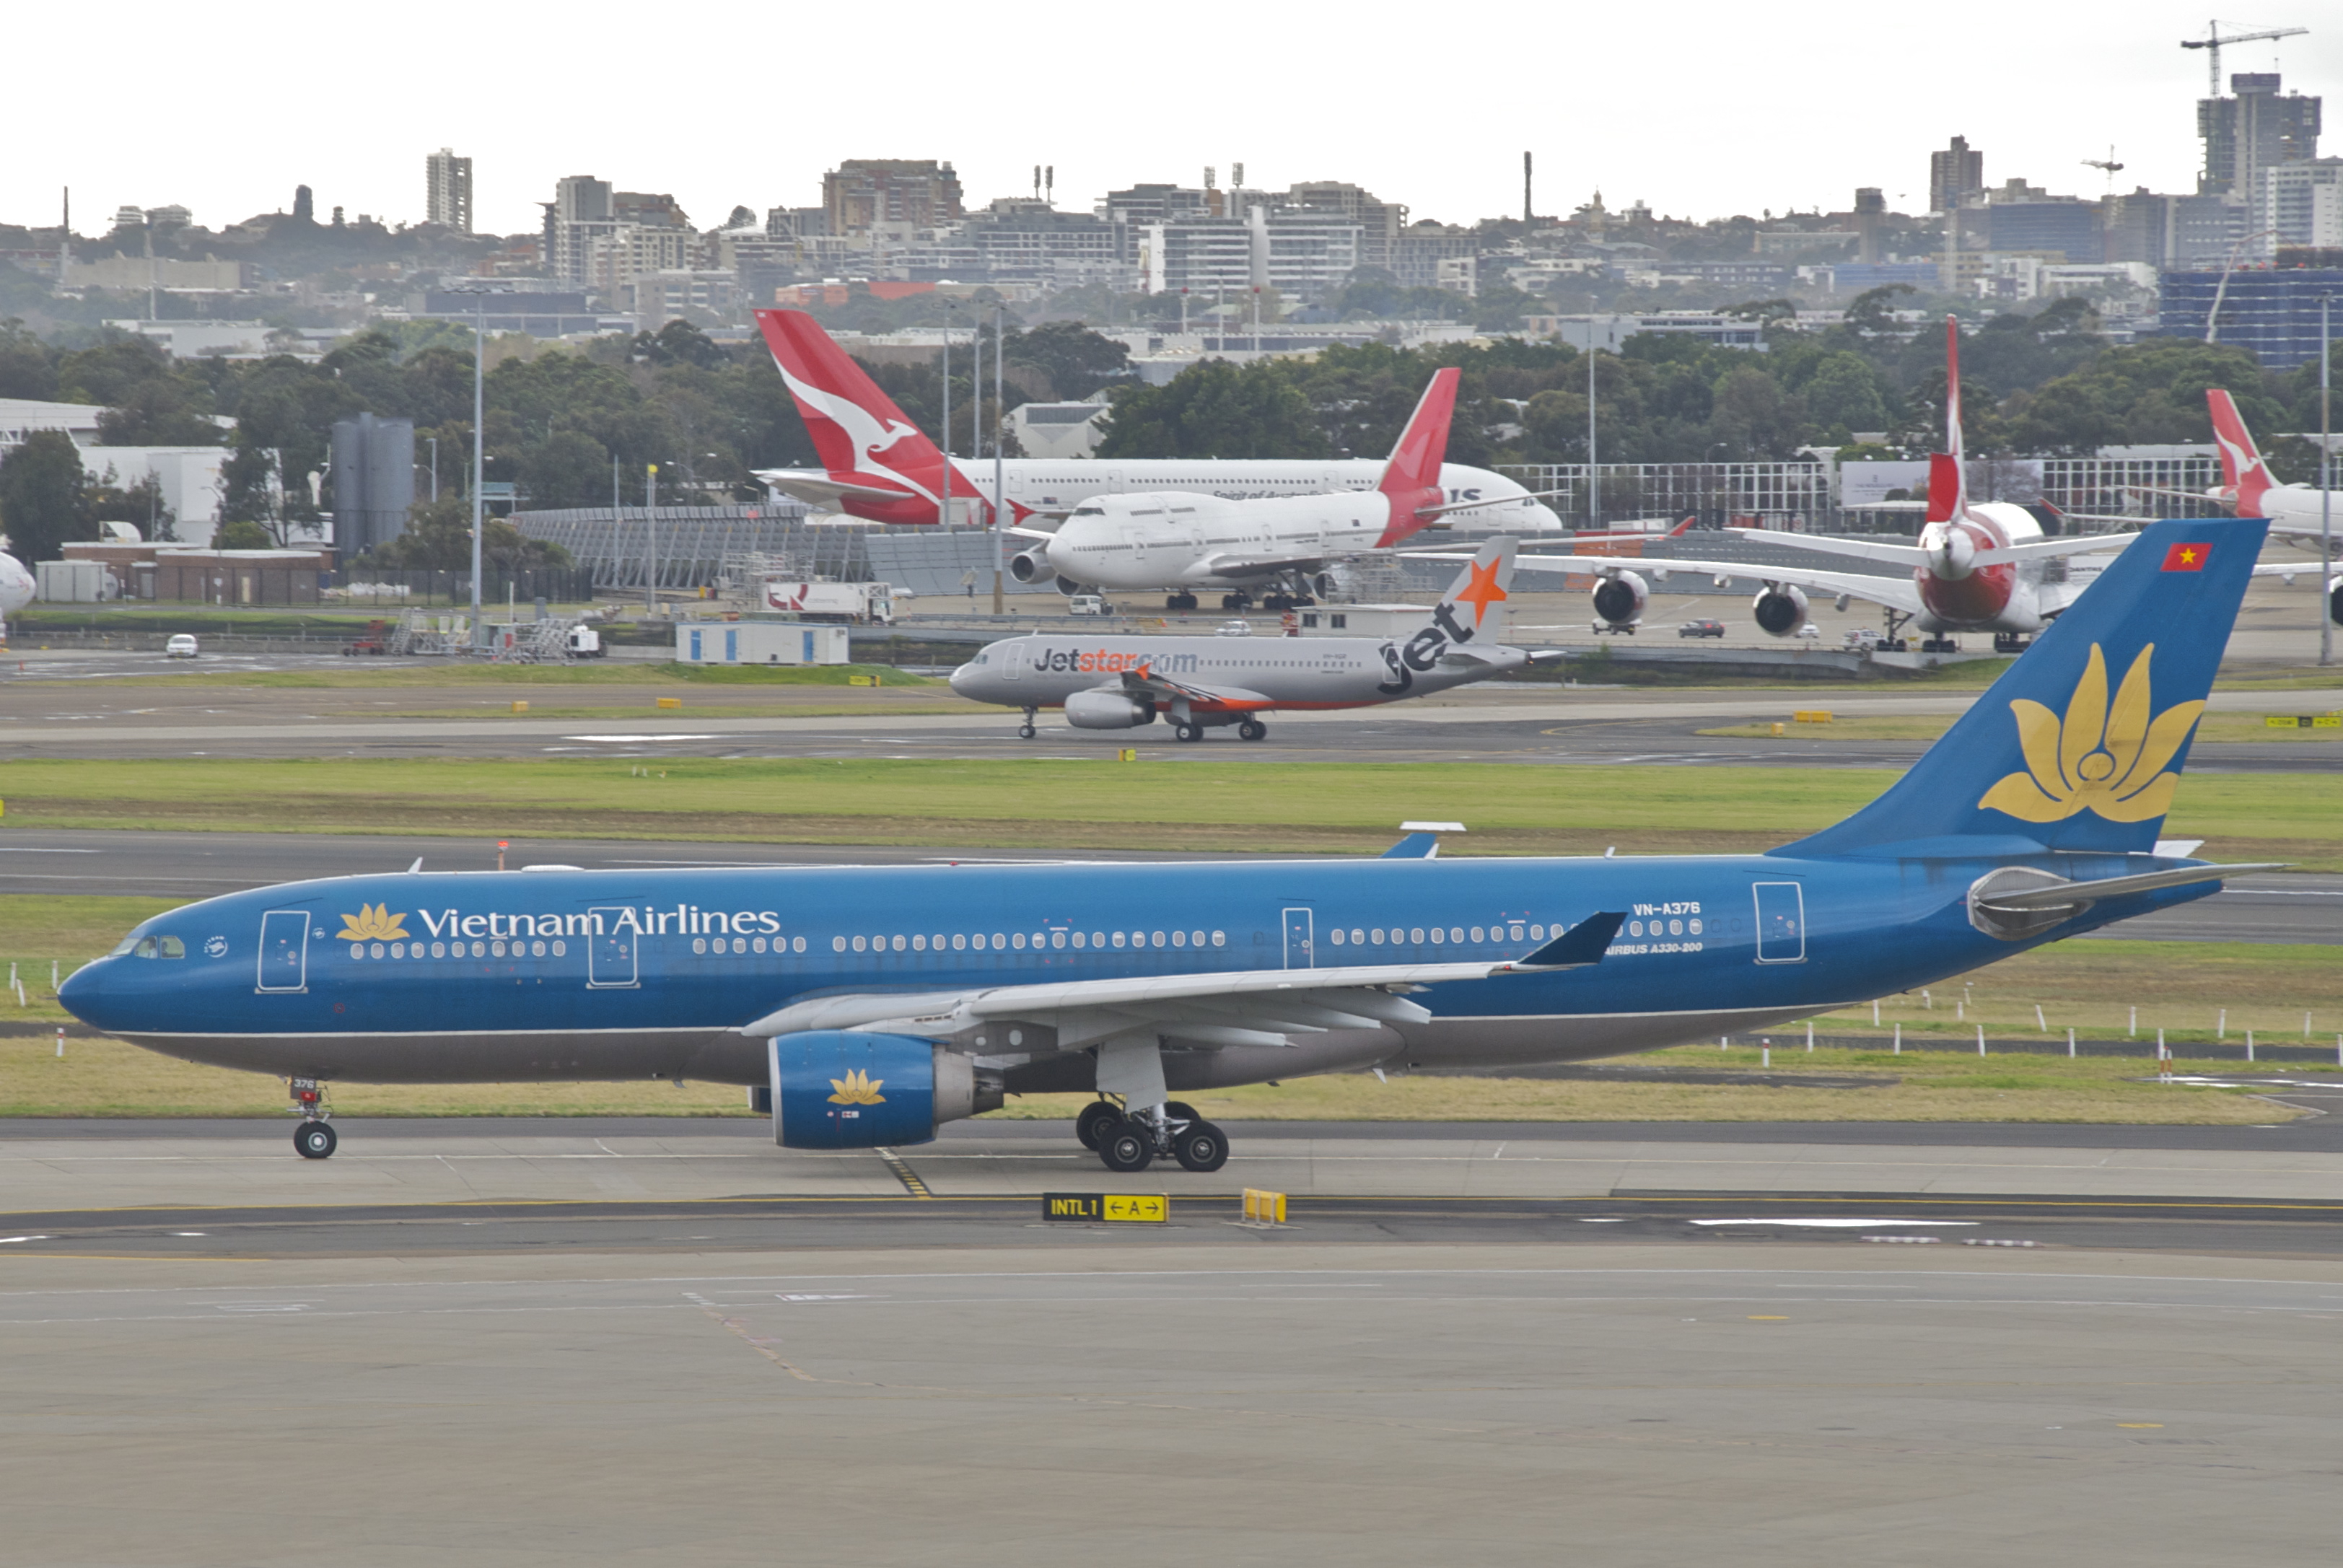 File:Vietnam Airlines Airbus A330-200; VN-A376@SYD;31.07.2012 